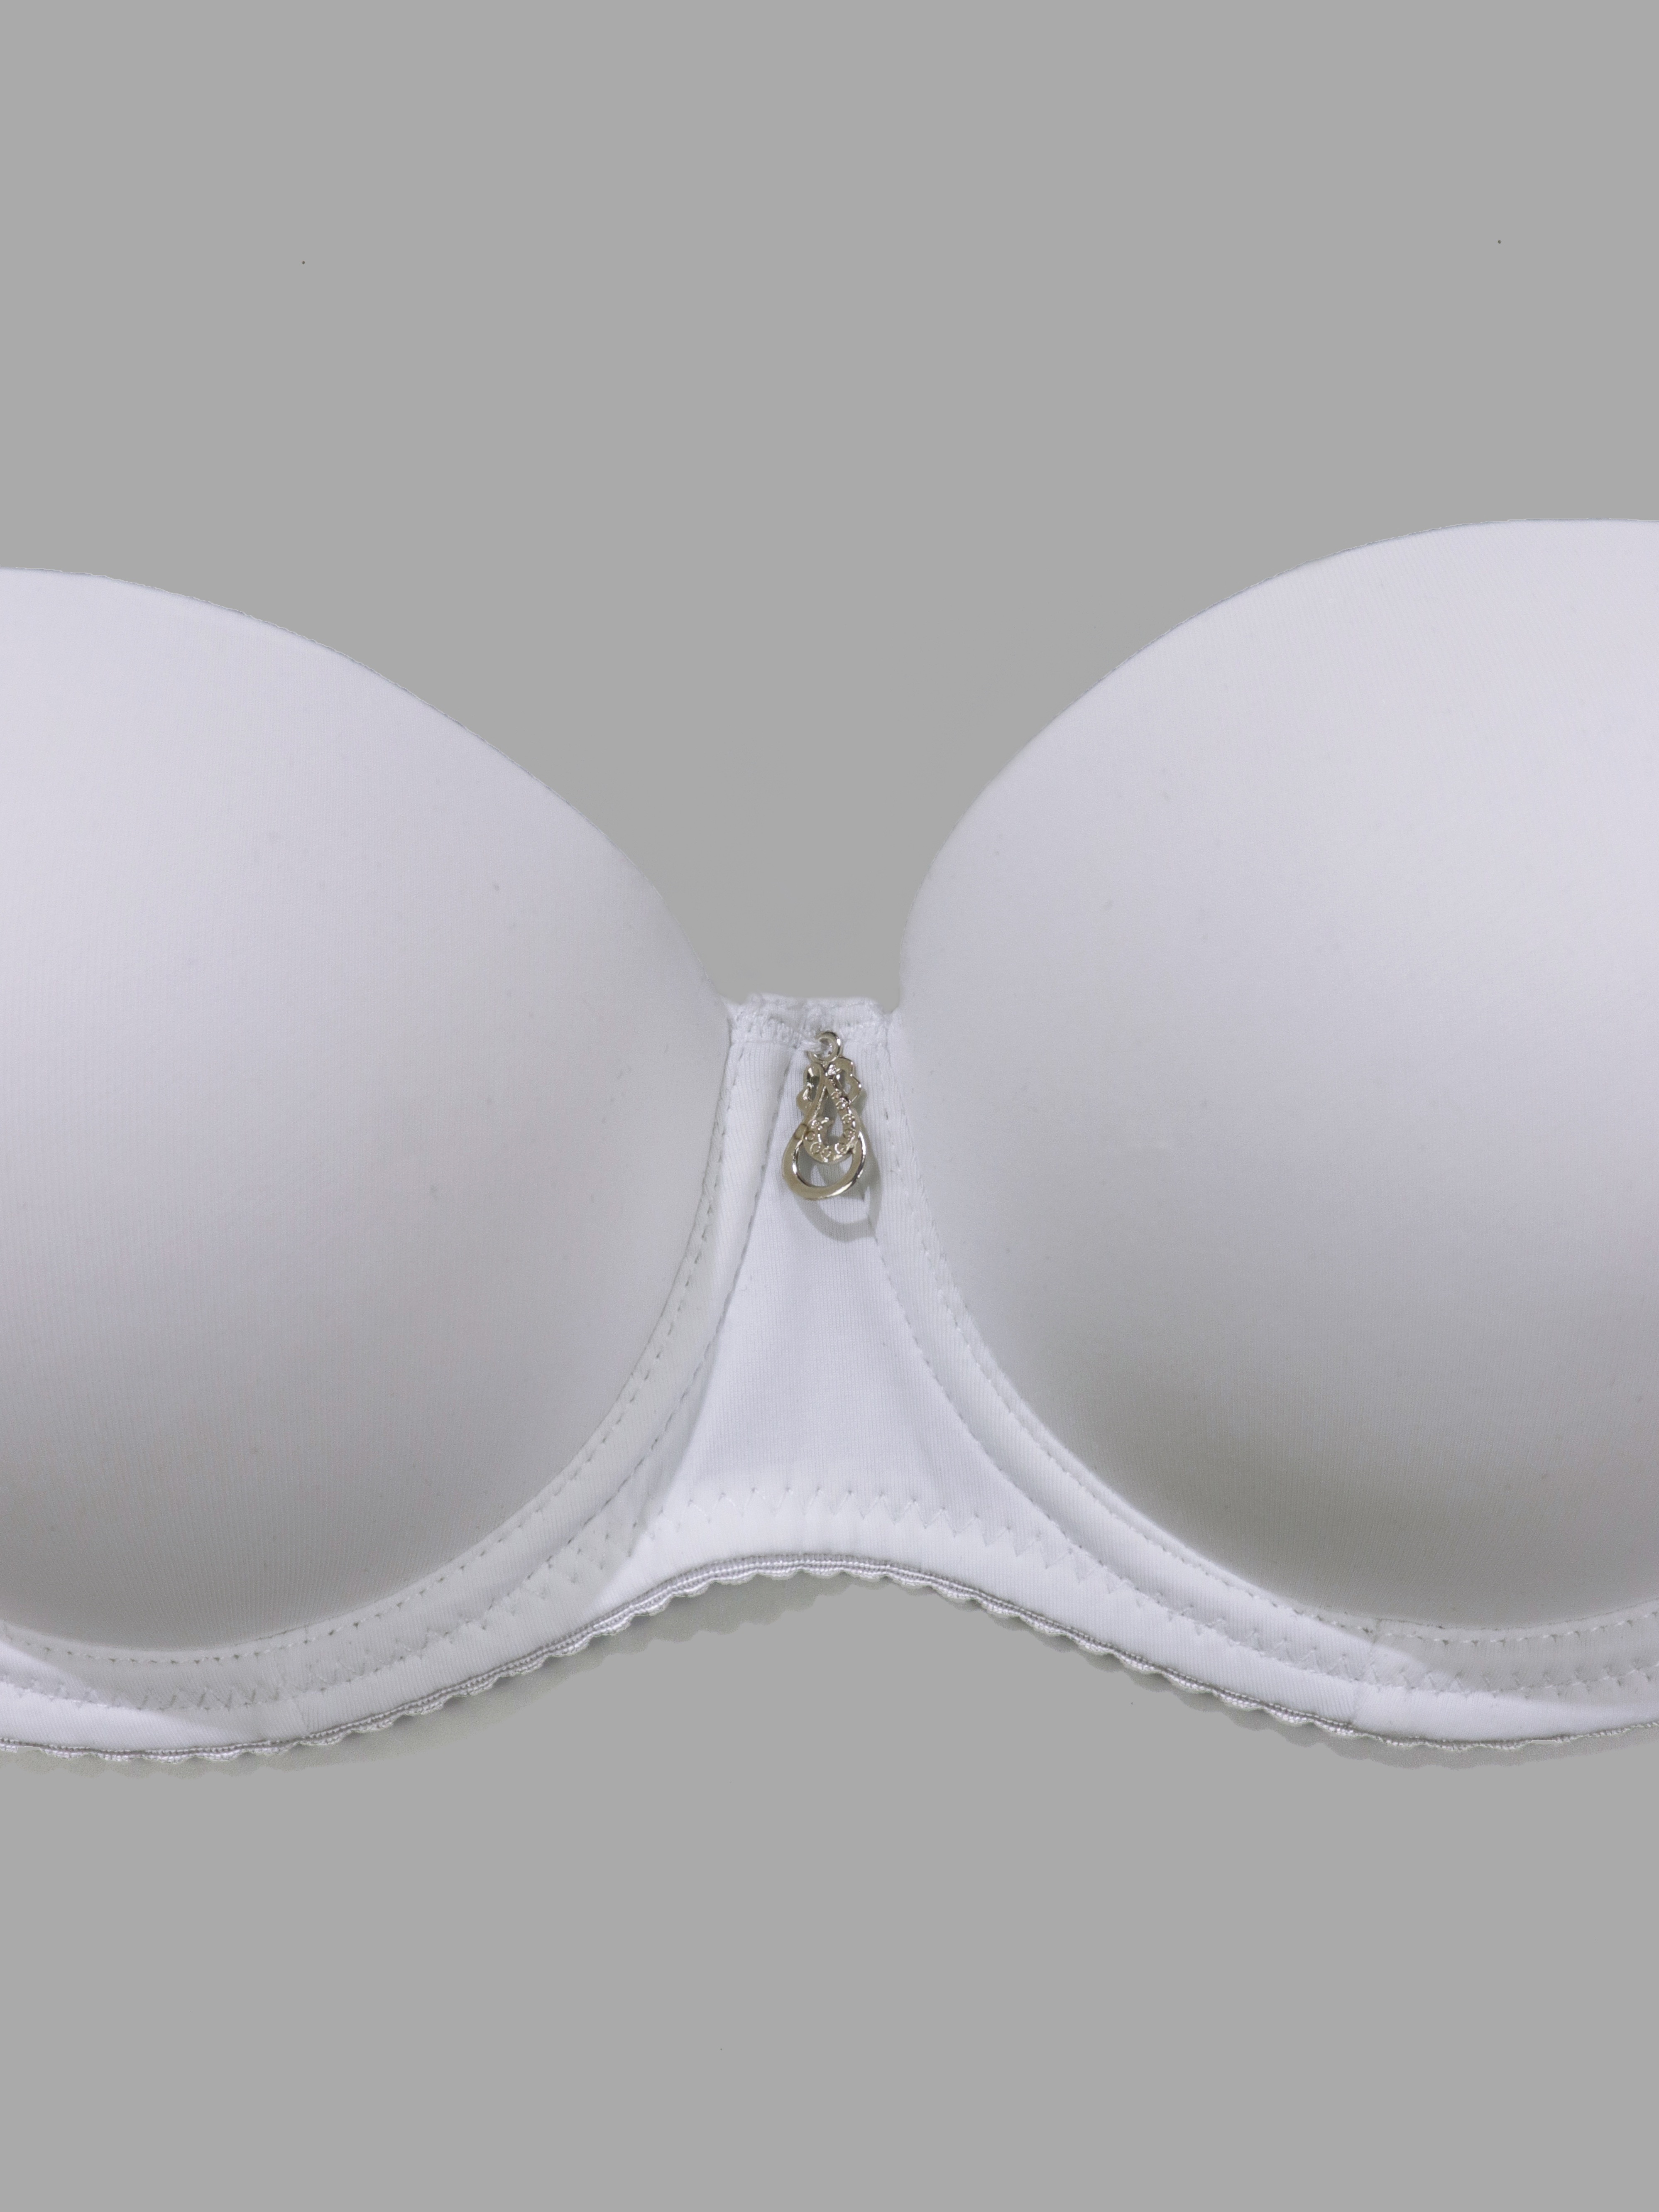 Women Transparent Clear PVC Strong Invisible Strap Push Up Bra Women's Bras